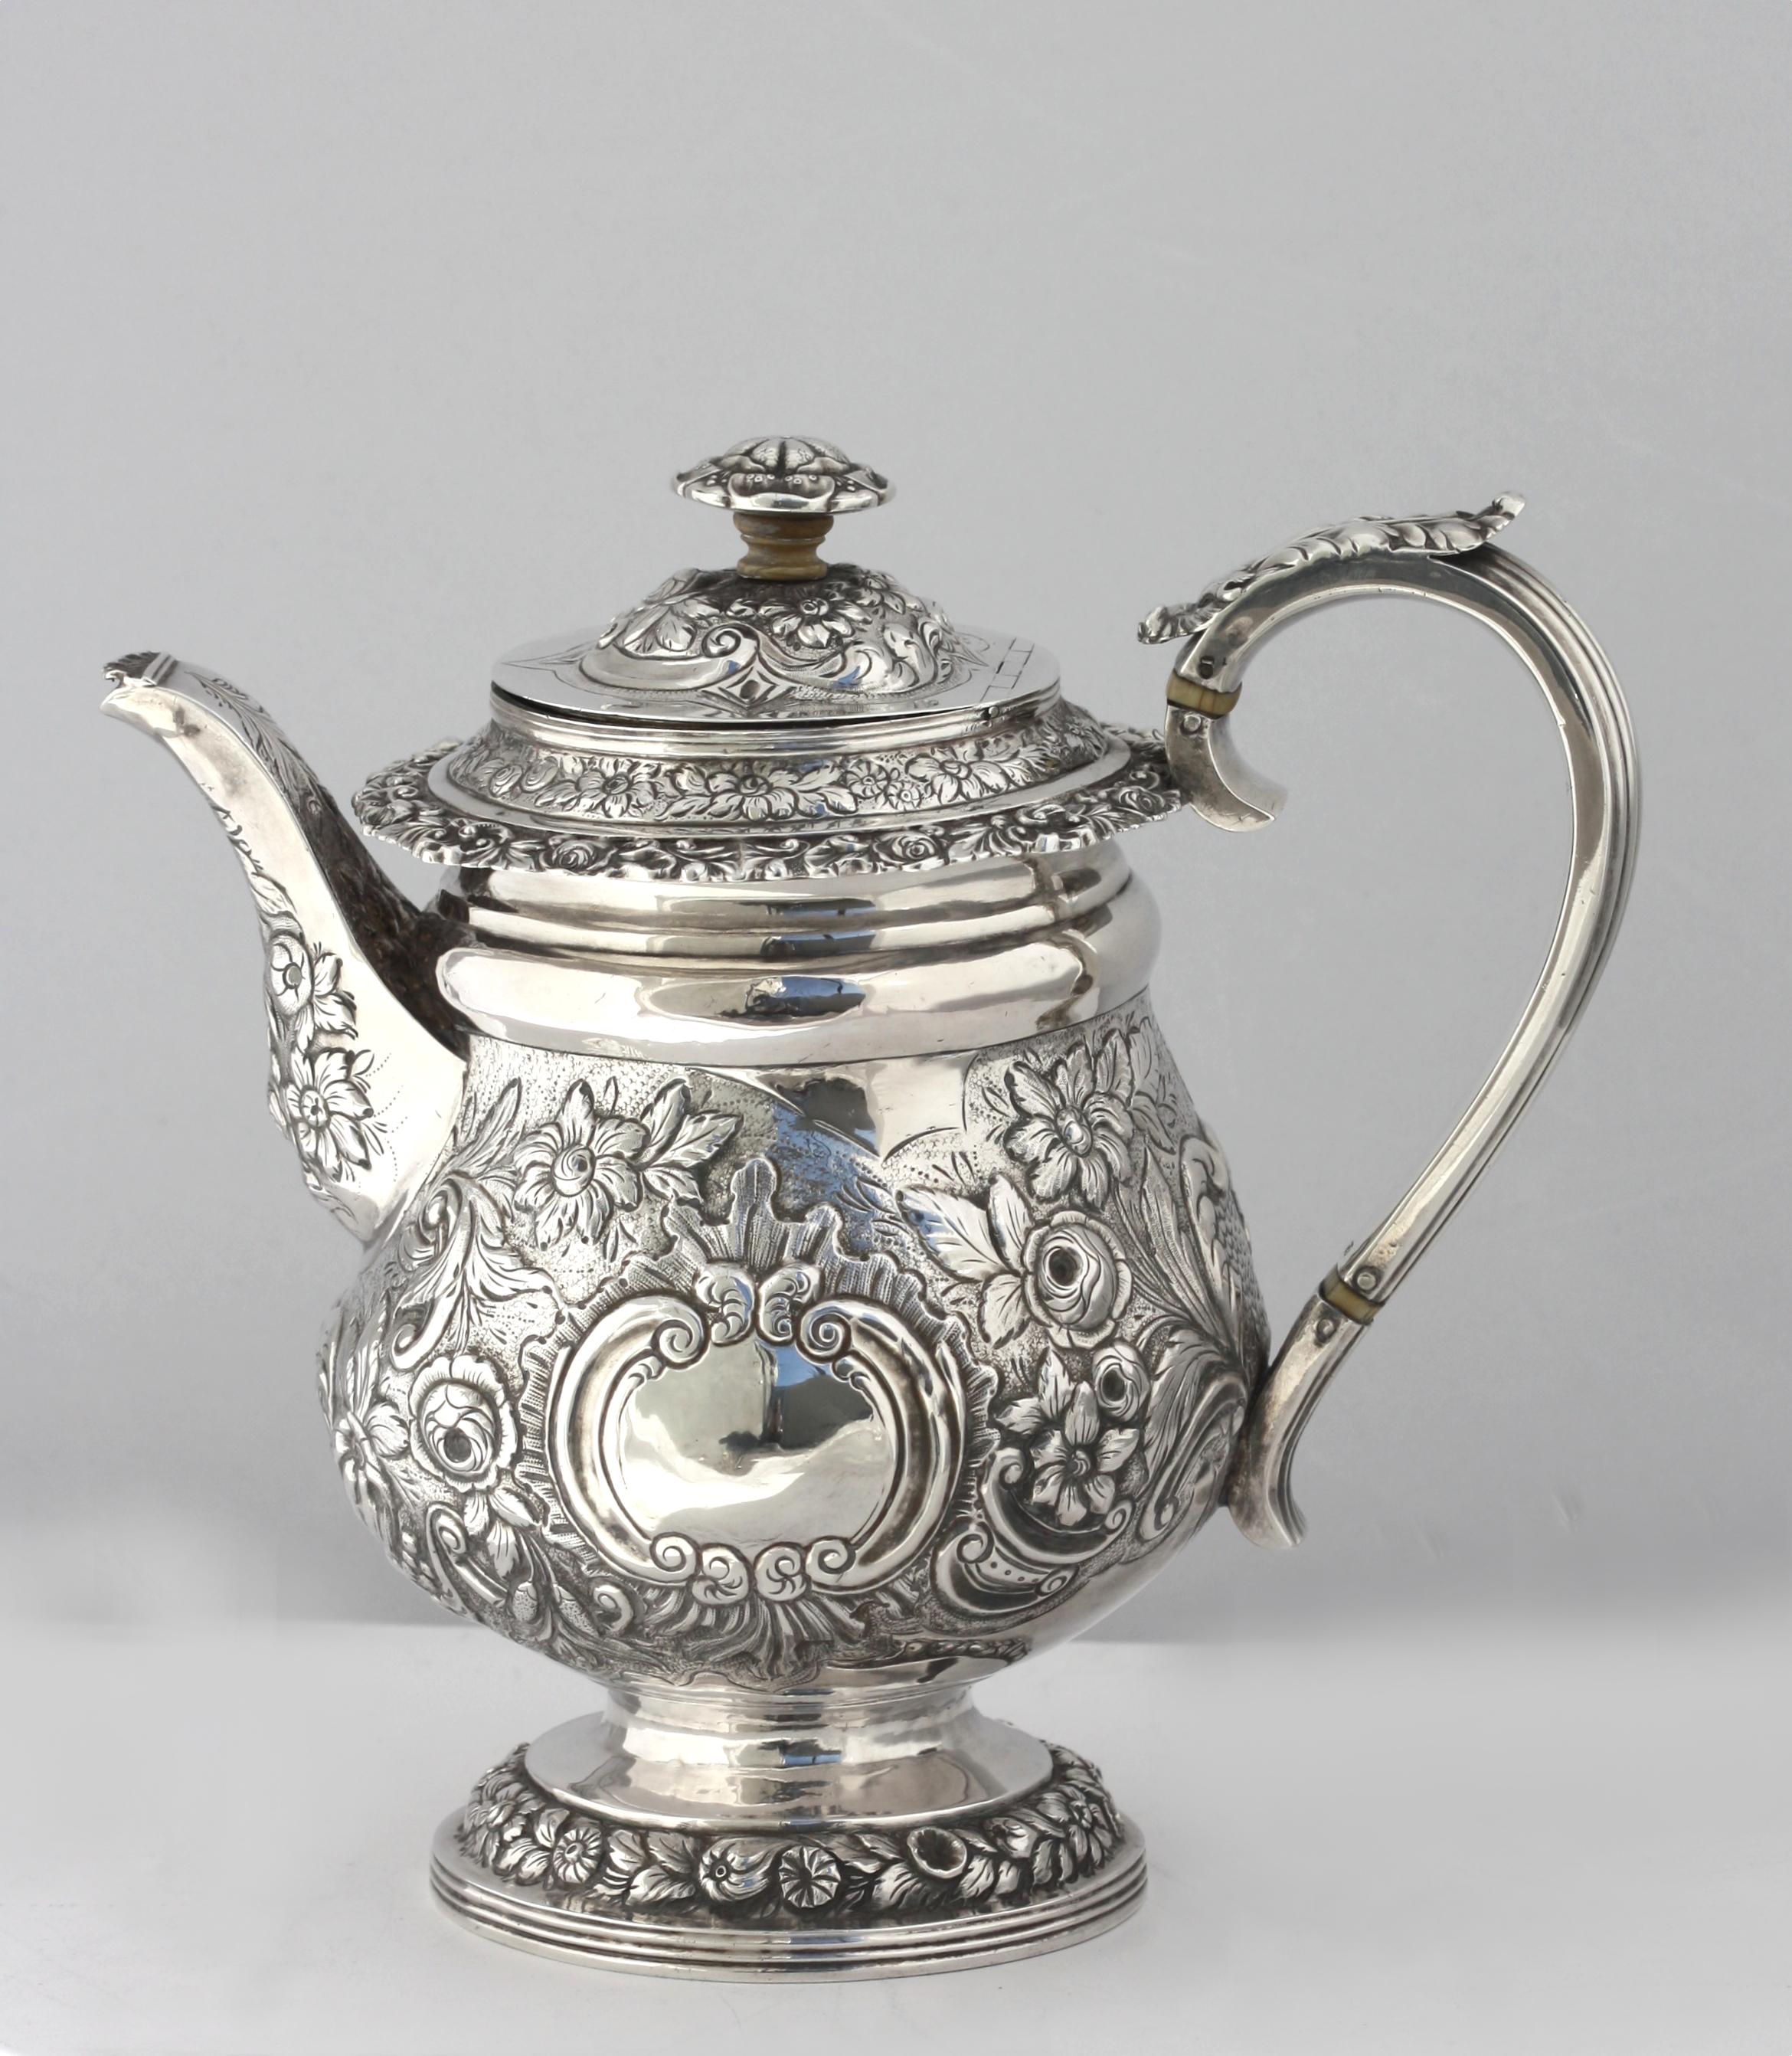 English Rococo Silver Teapot, Marked, 1822-1823, maker TB, for Thomas Baker In Good Condition For Sale In West Palm Beach, FL